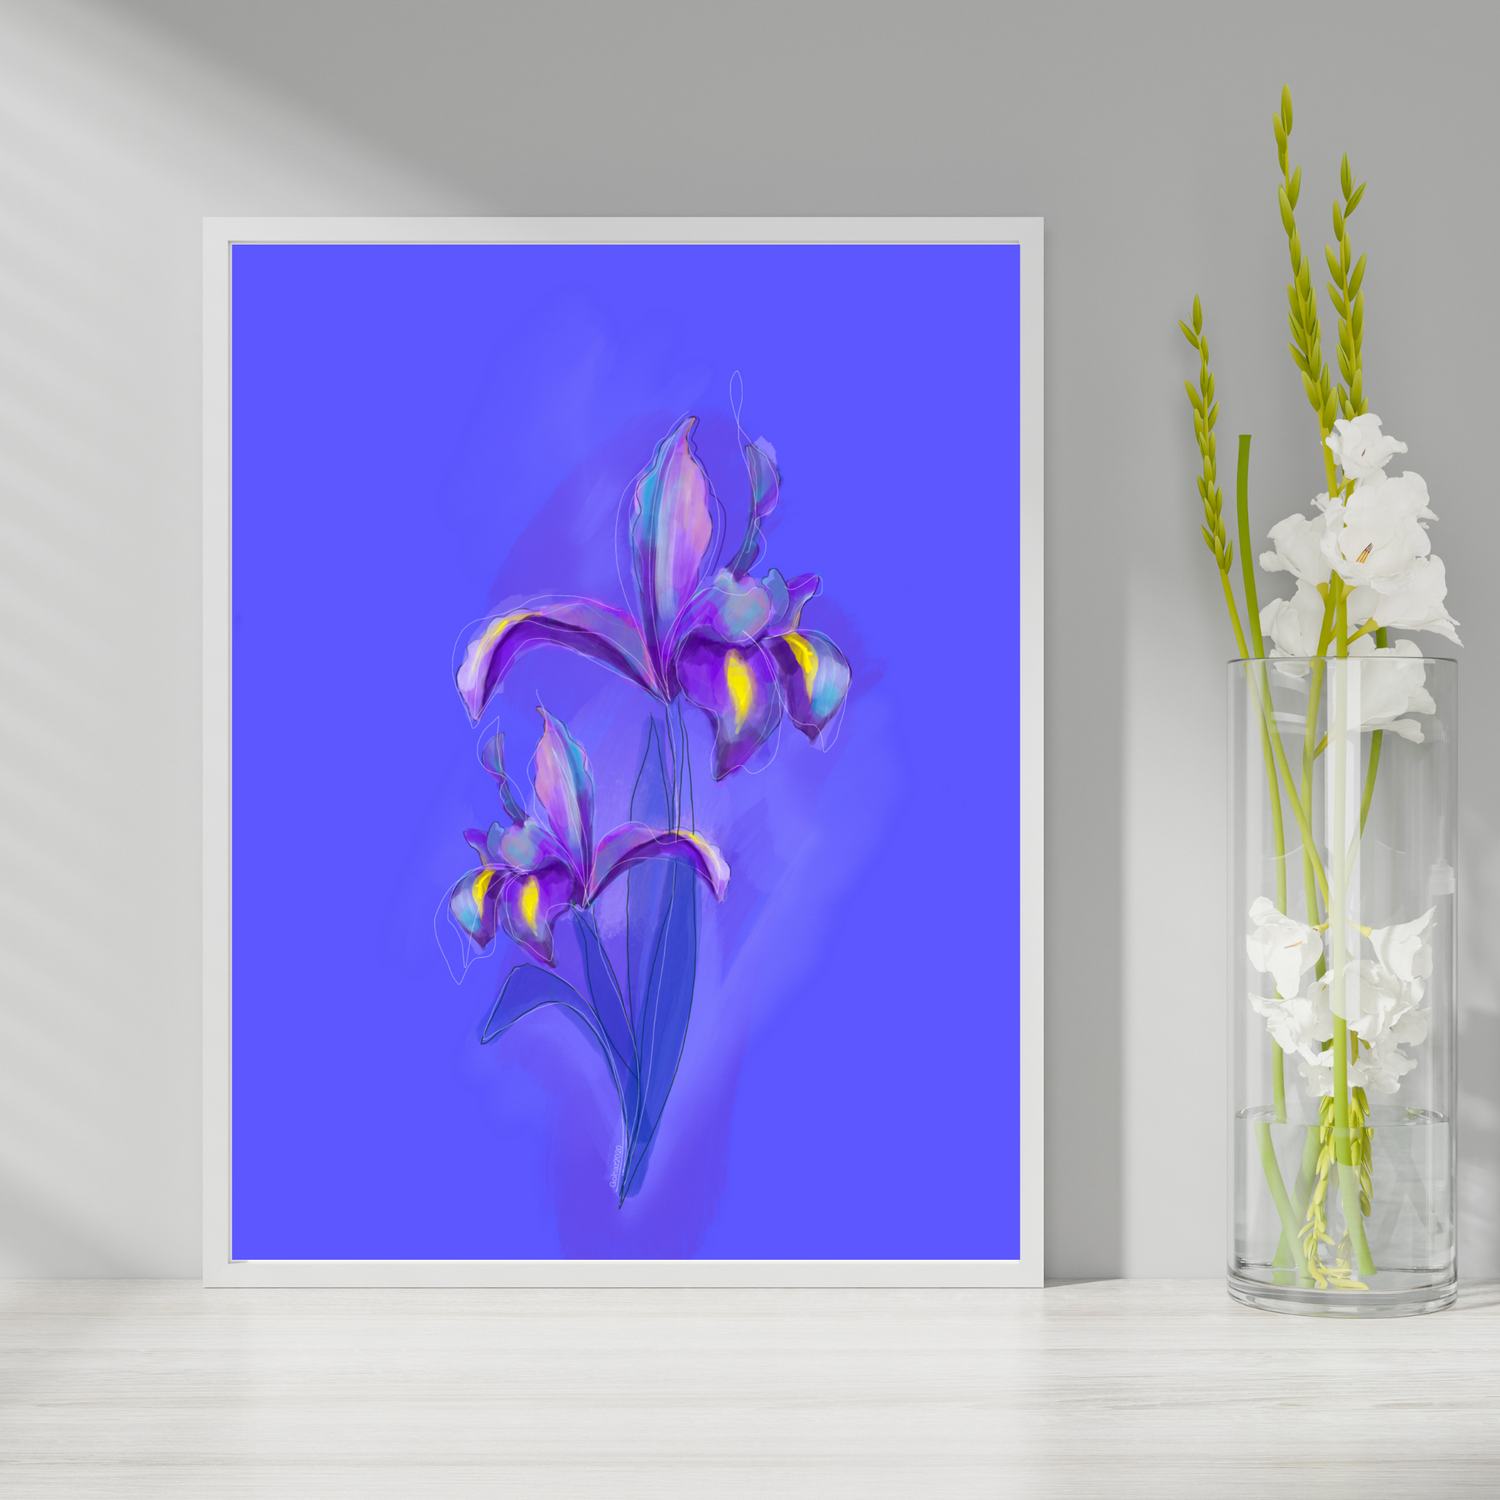 An example of the Iris painting by ArisaTeam near a vase of flowers